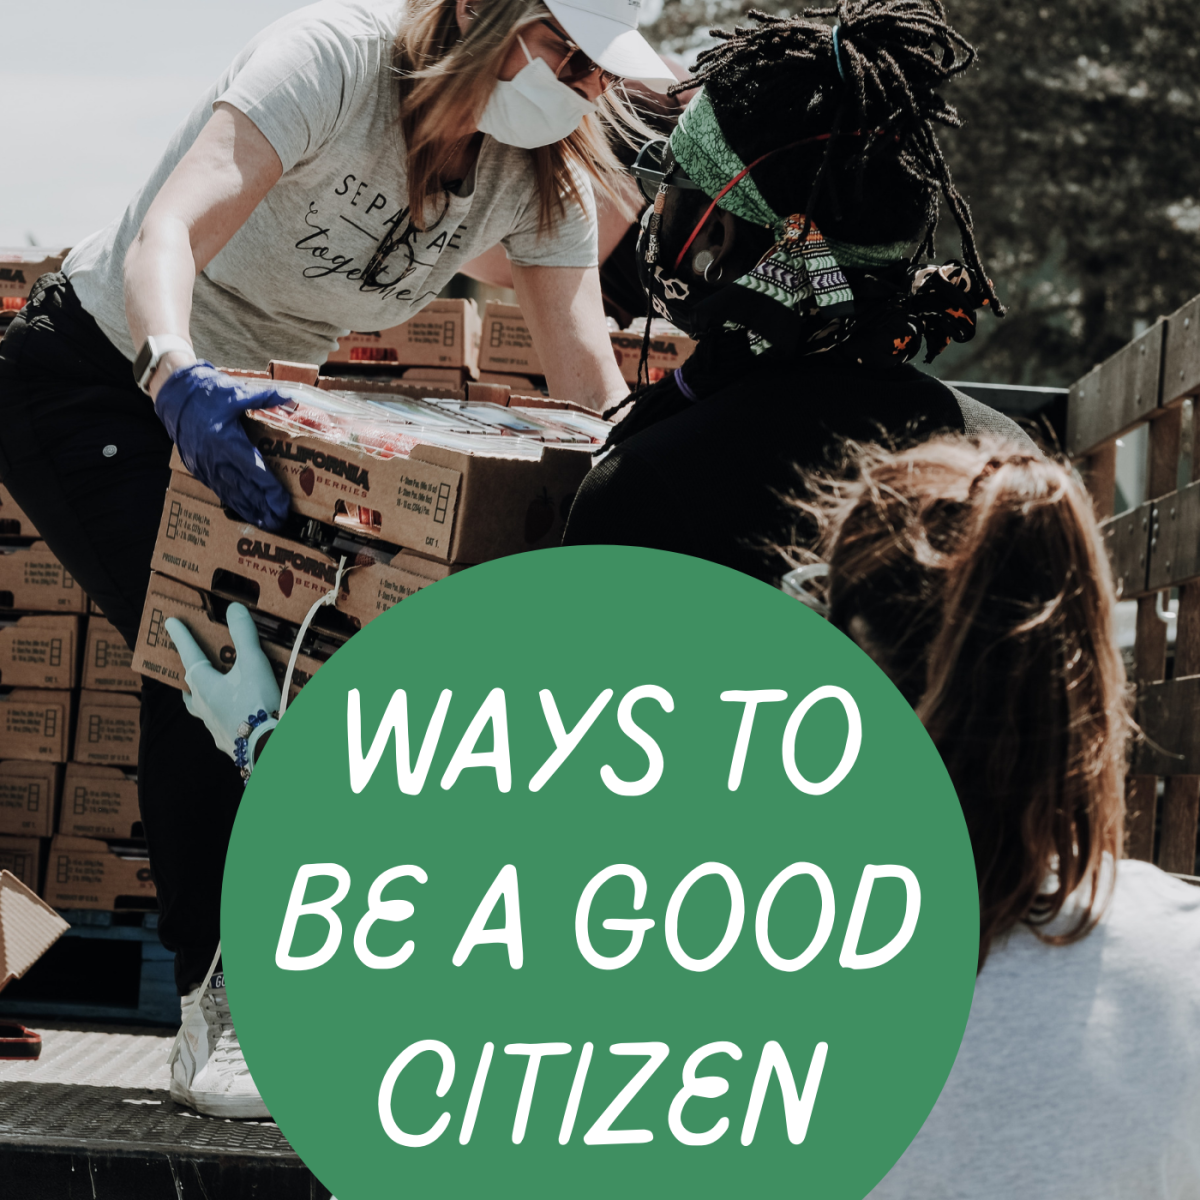 Volunteering in your community is just one way to be a better citizen. Learn more about what defines a "good citizen" and how you can do more good in your community.